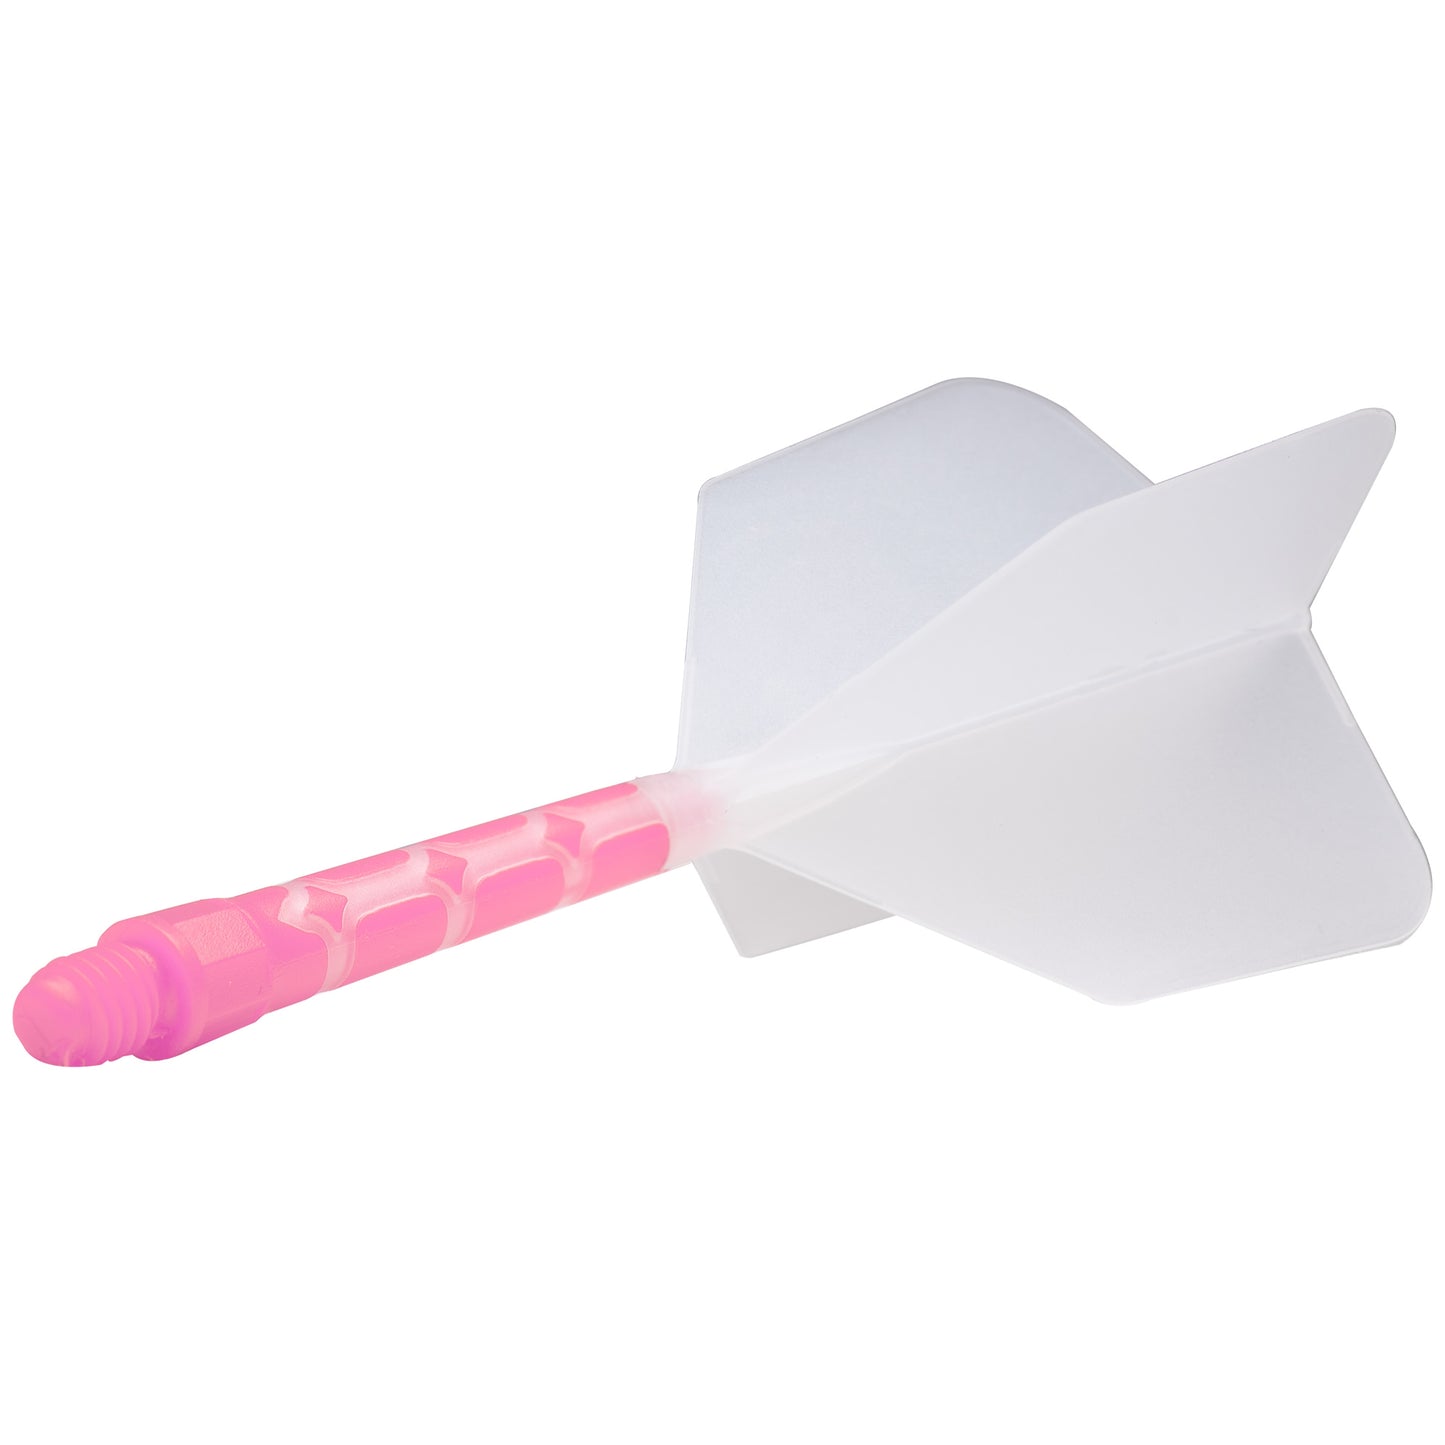 *Cuesoul Rost T19 Integrated Dart Shaft and Flights - Big Wing - Pink with Clear Flight